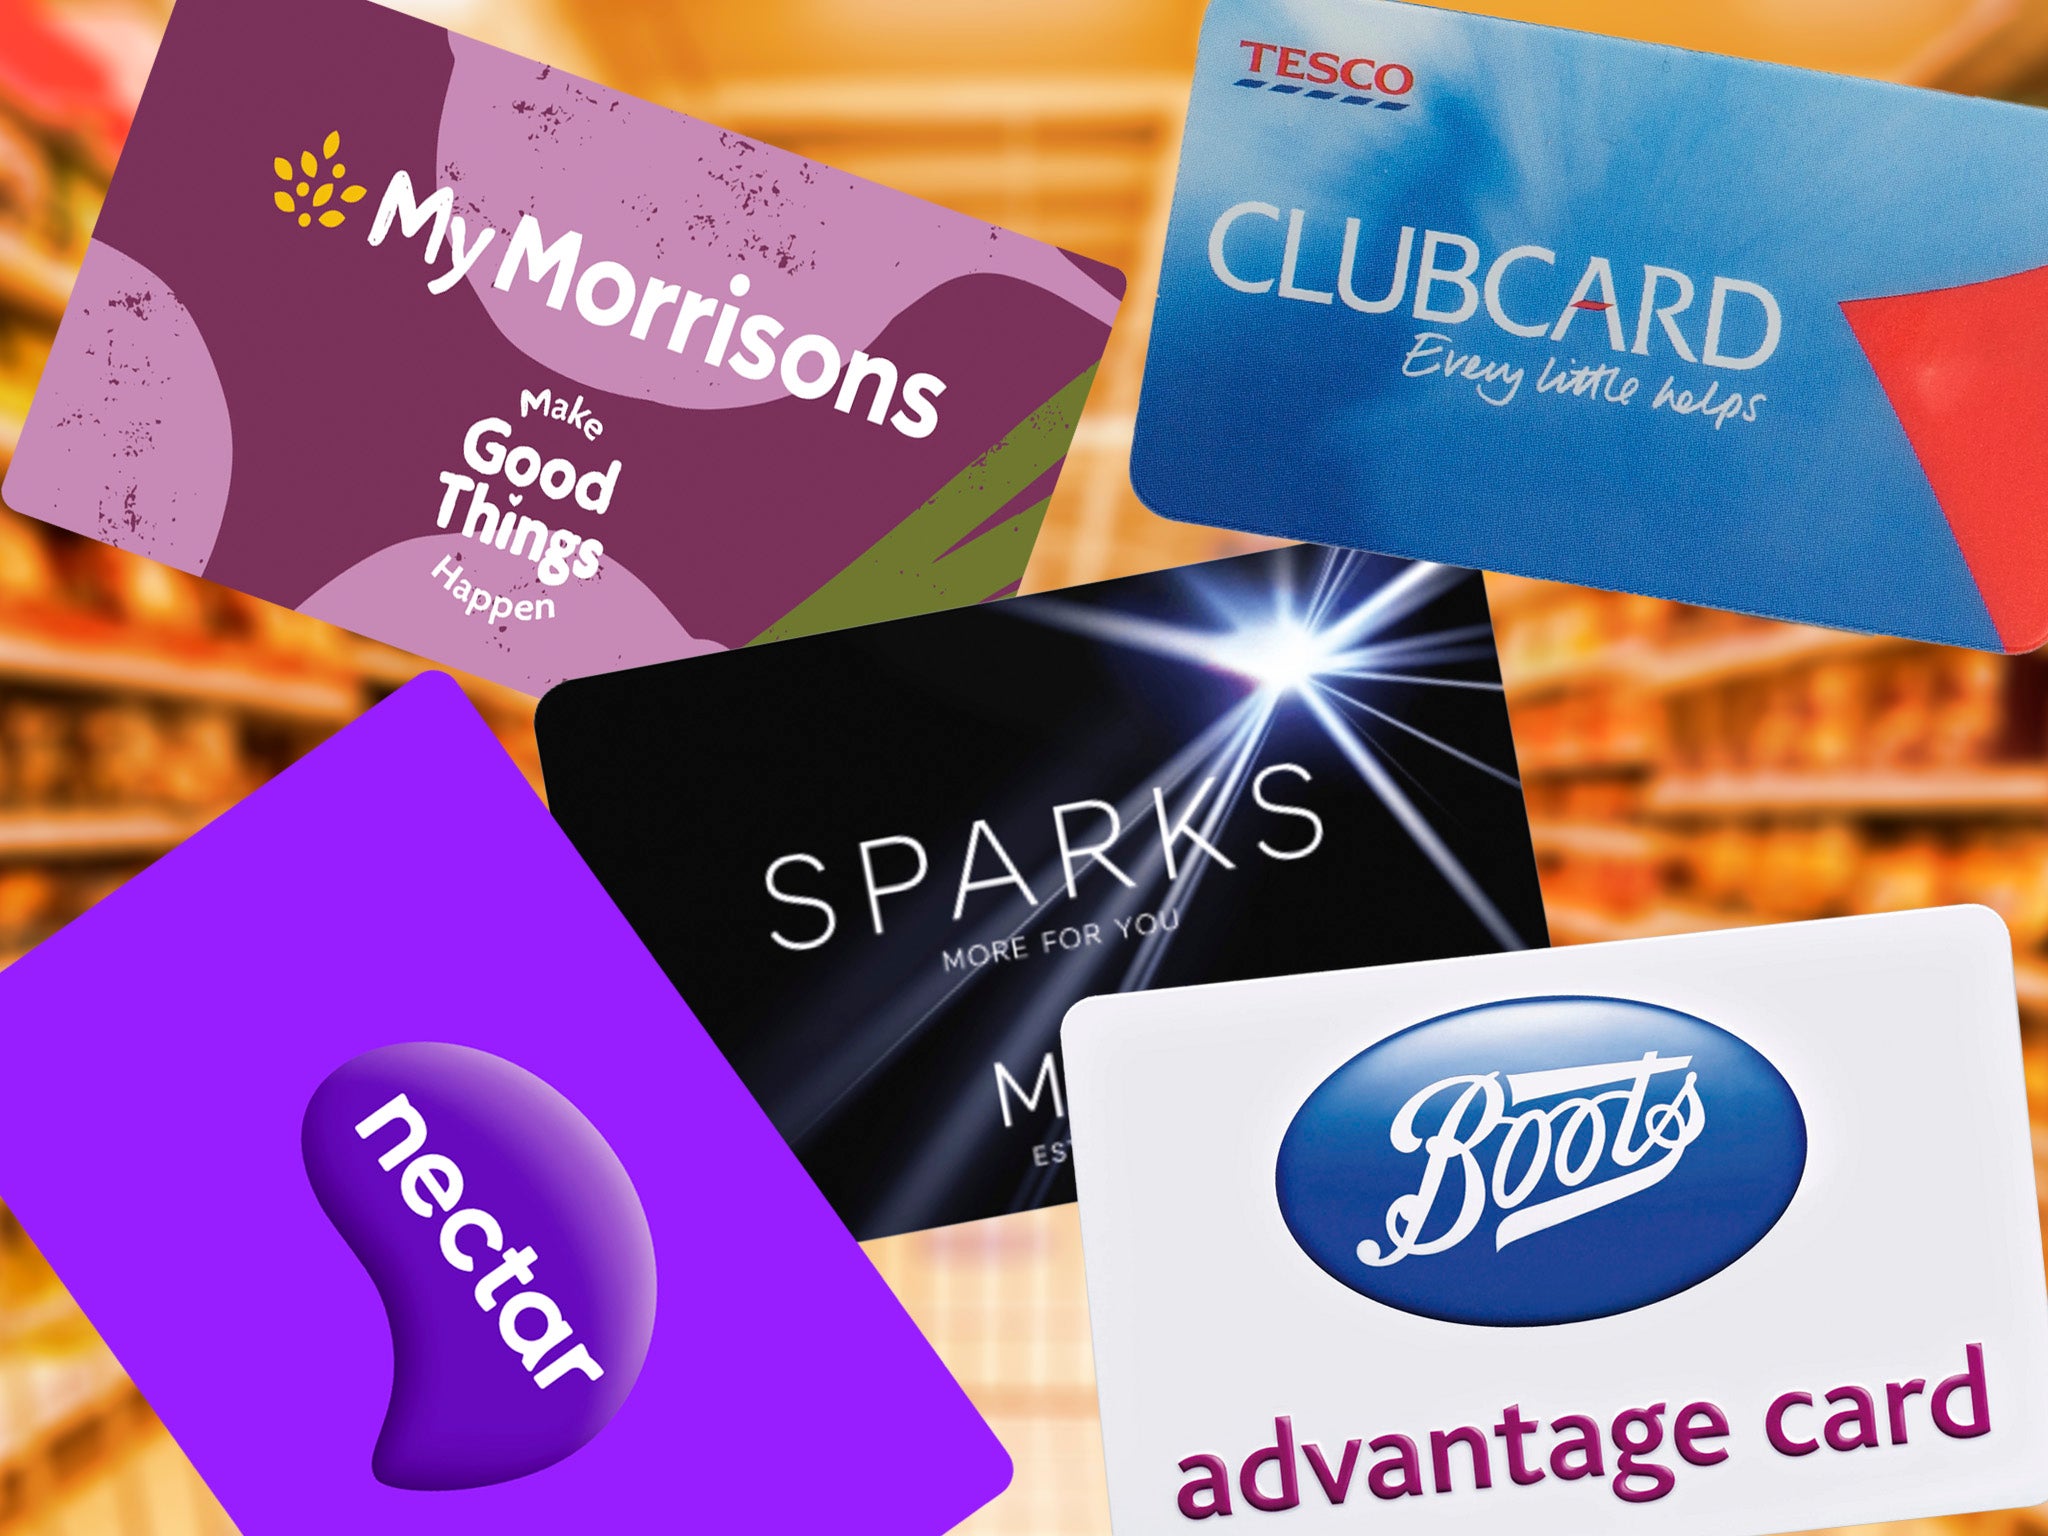 revealed-the-supermarkets-making-advantage-card-changes-like-boots-geekx